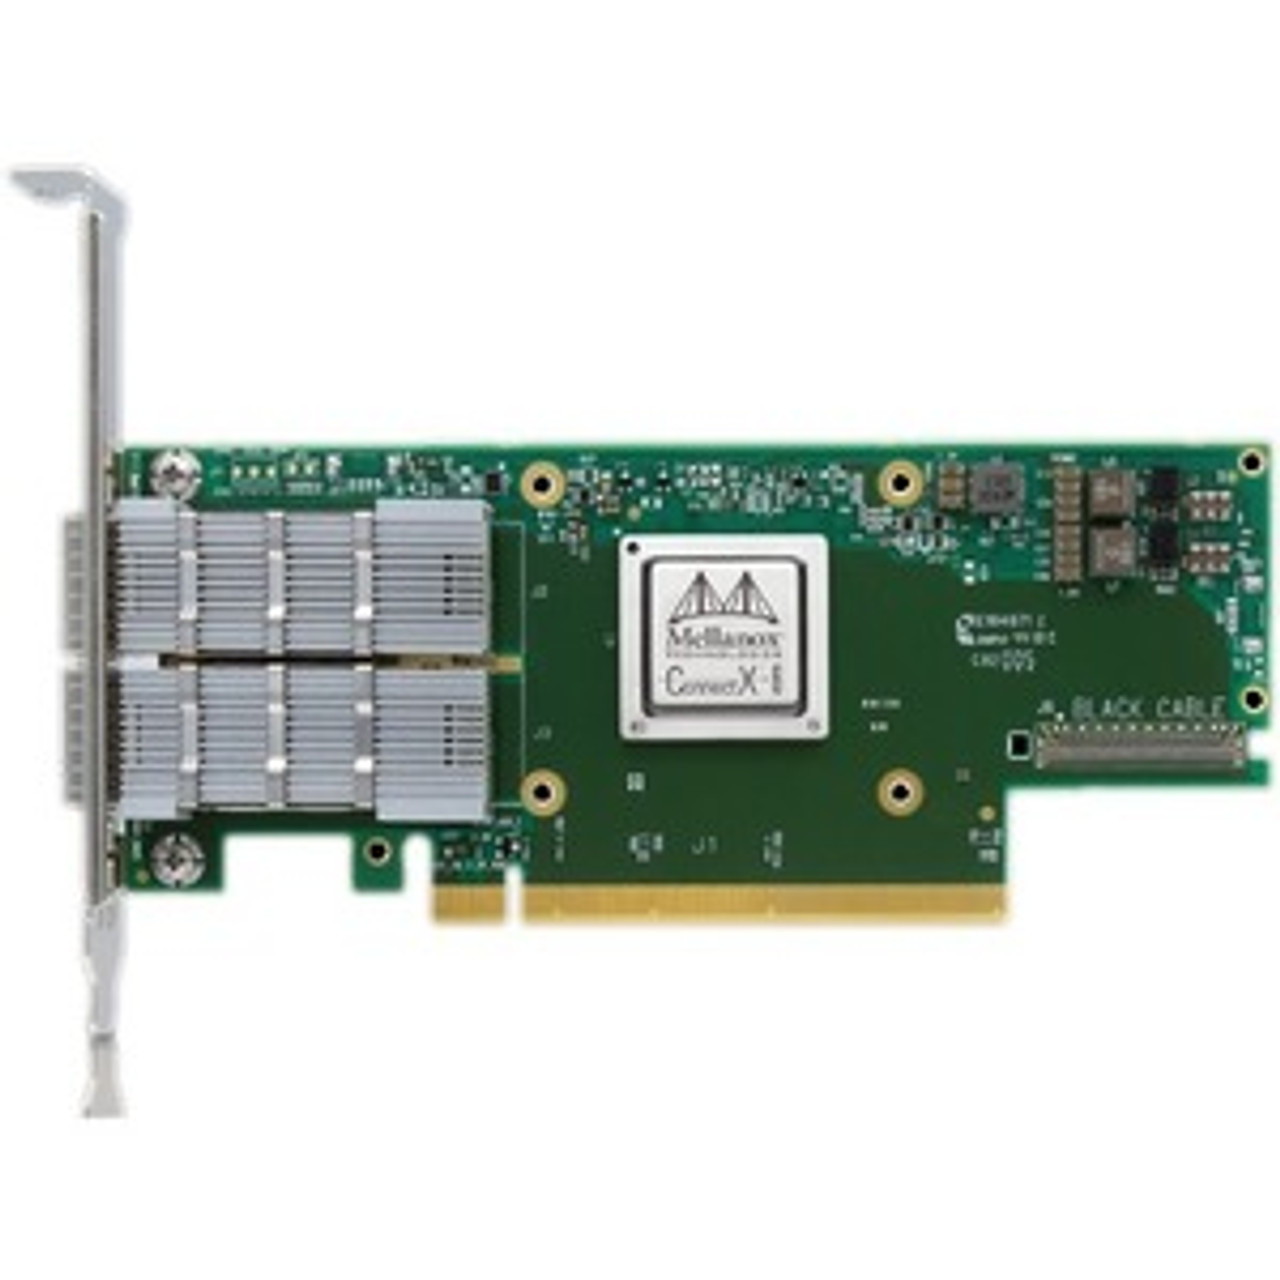 MCX653435A-EDAI NVIDIA ConnectX-6 VPI Adapter Card HDR100 EDR InfiniBand and 100GbE for OCP 3.0 with Host Management Single-Port QSFP56 PCIe 3.0/4.0 x